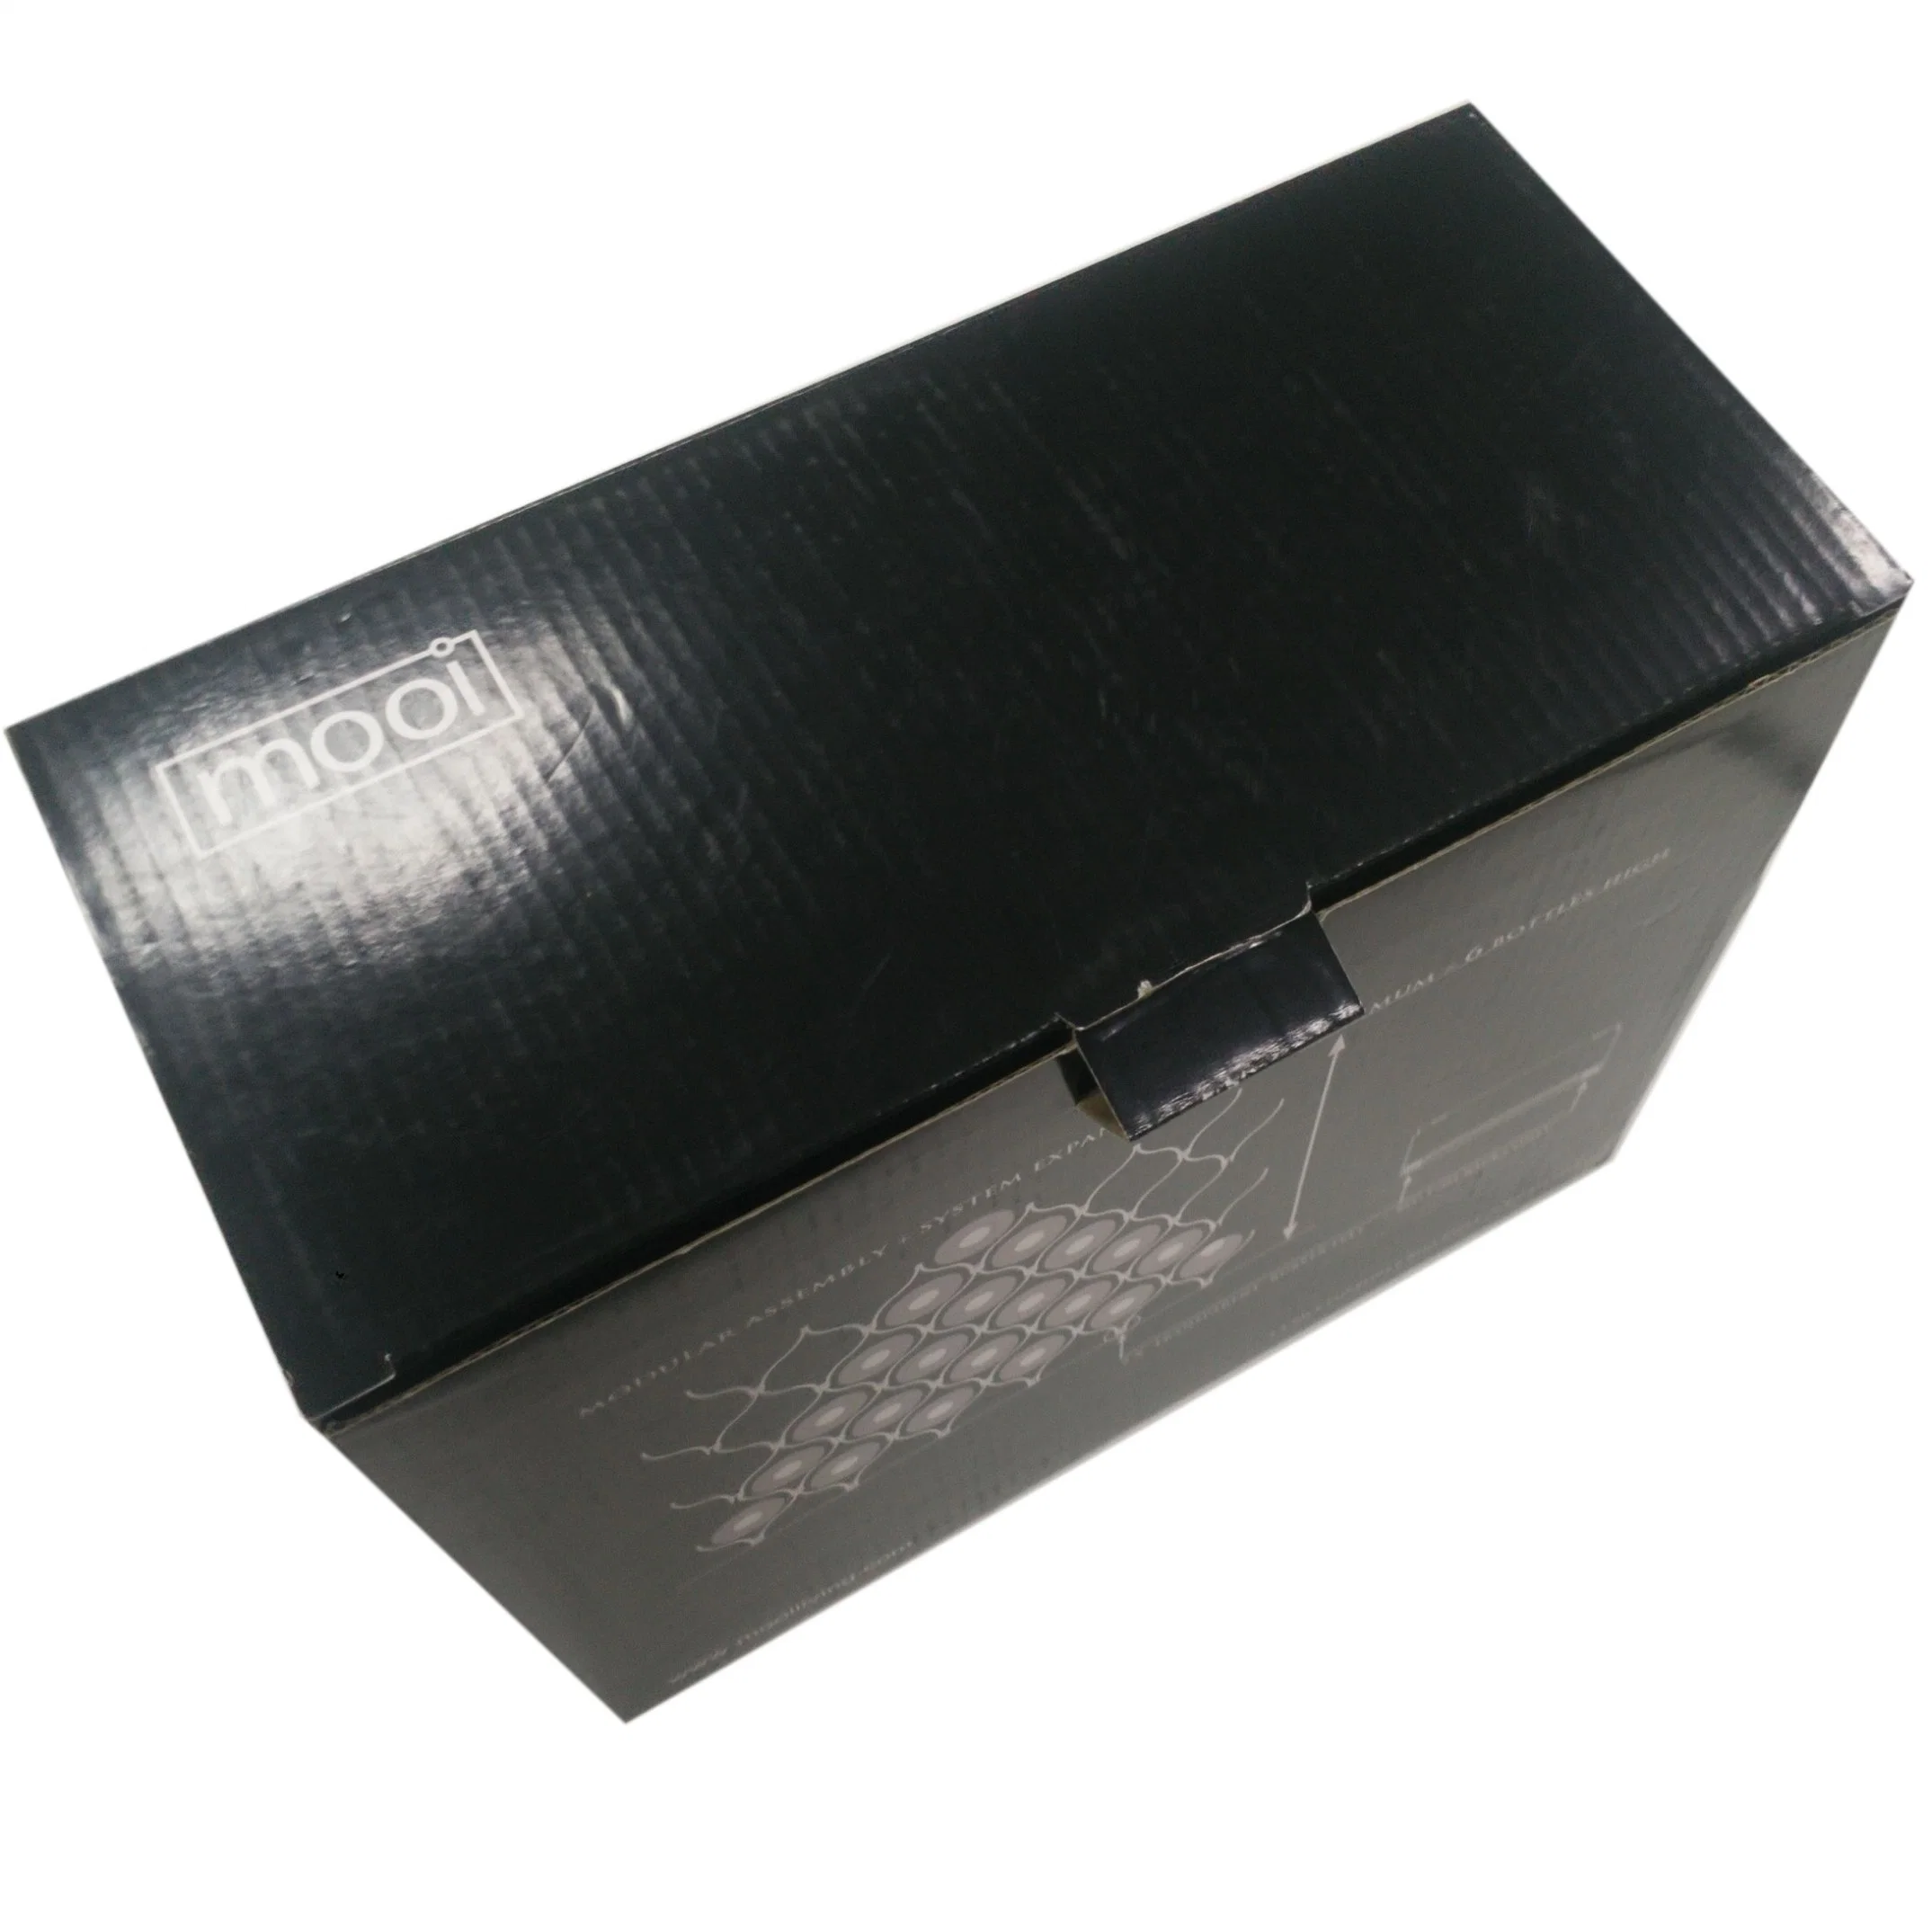 Free Design Corrugated Paper Box Package